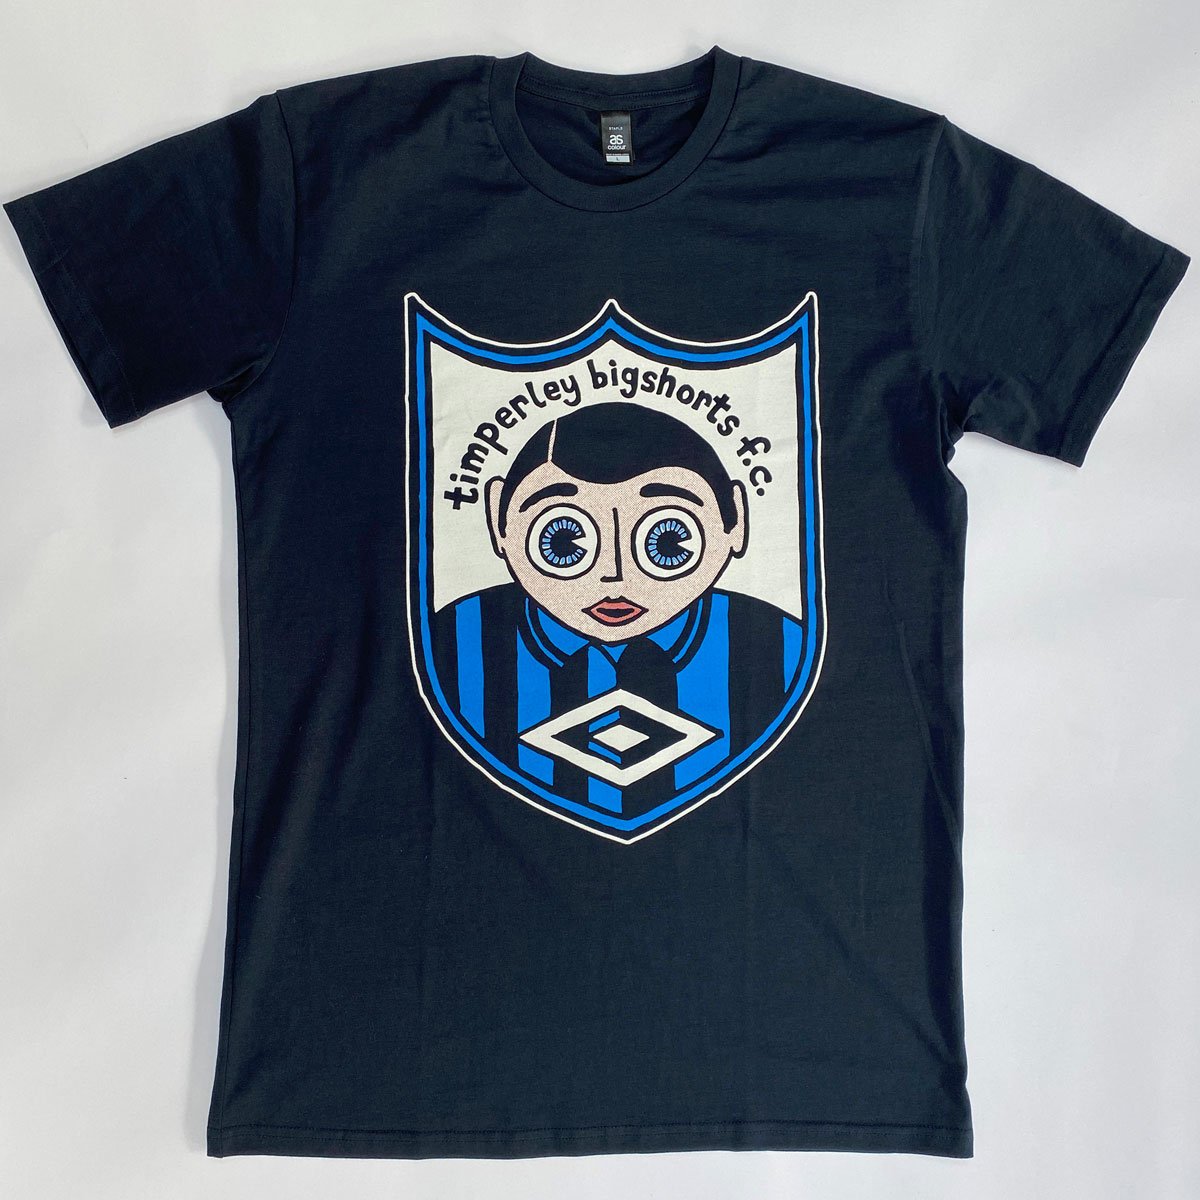 Image of 'Deluxe' Timperley Bigshorts squad t-shirt - Away